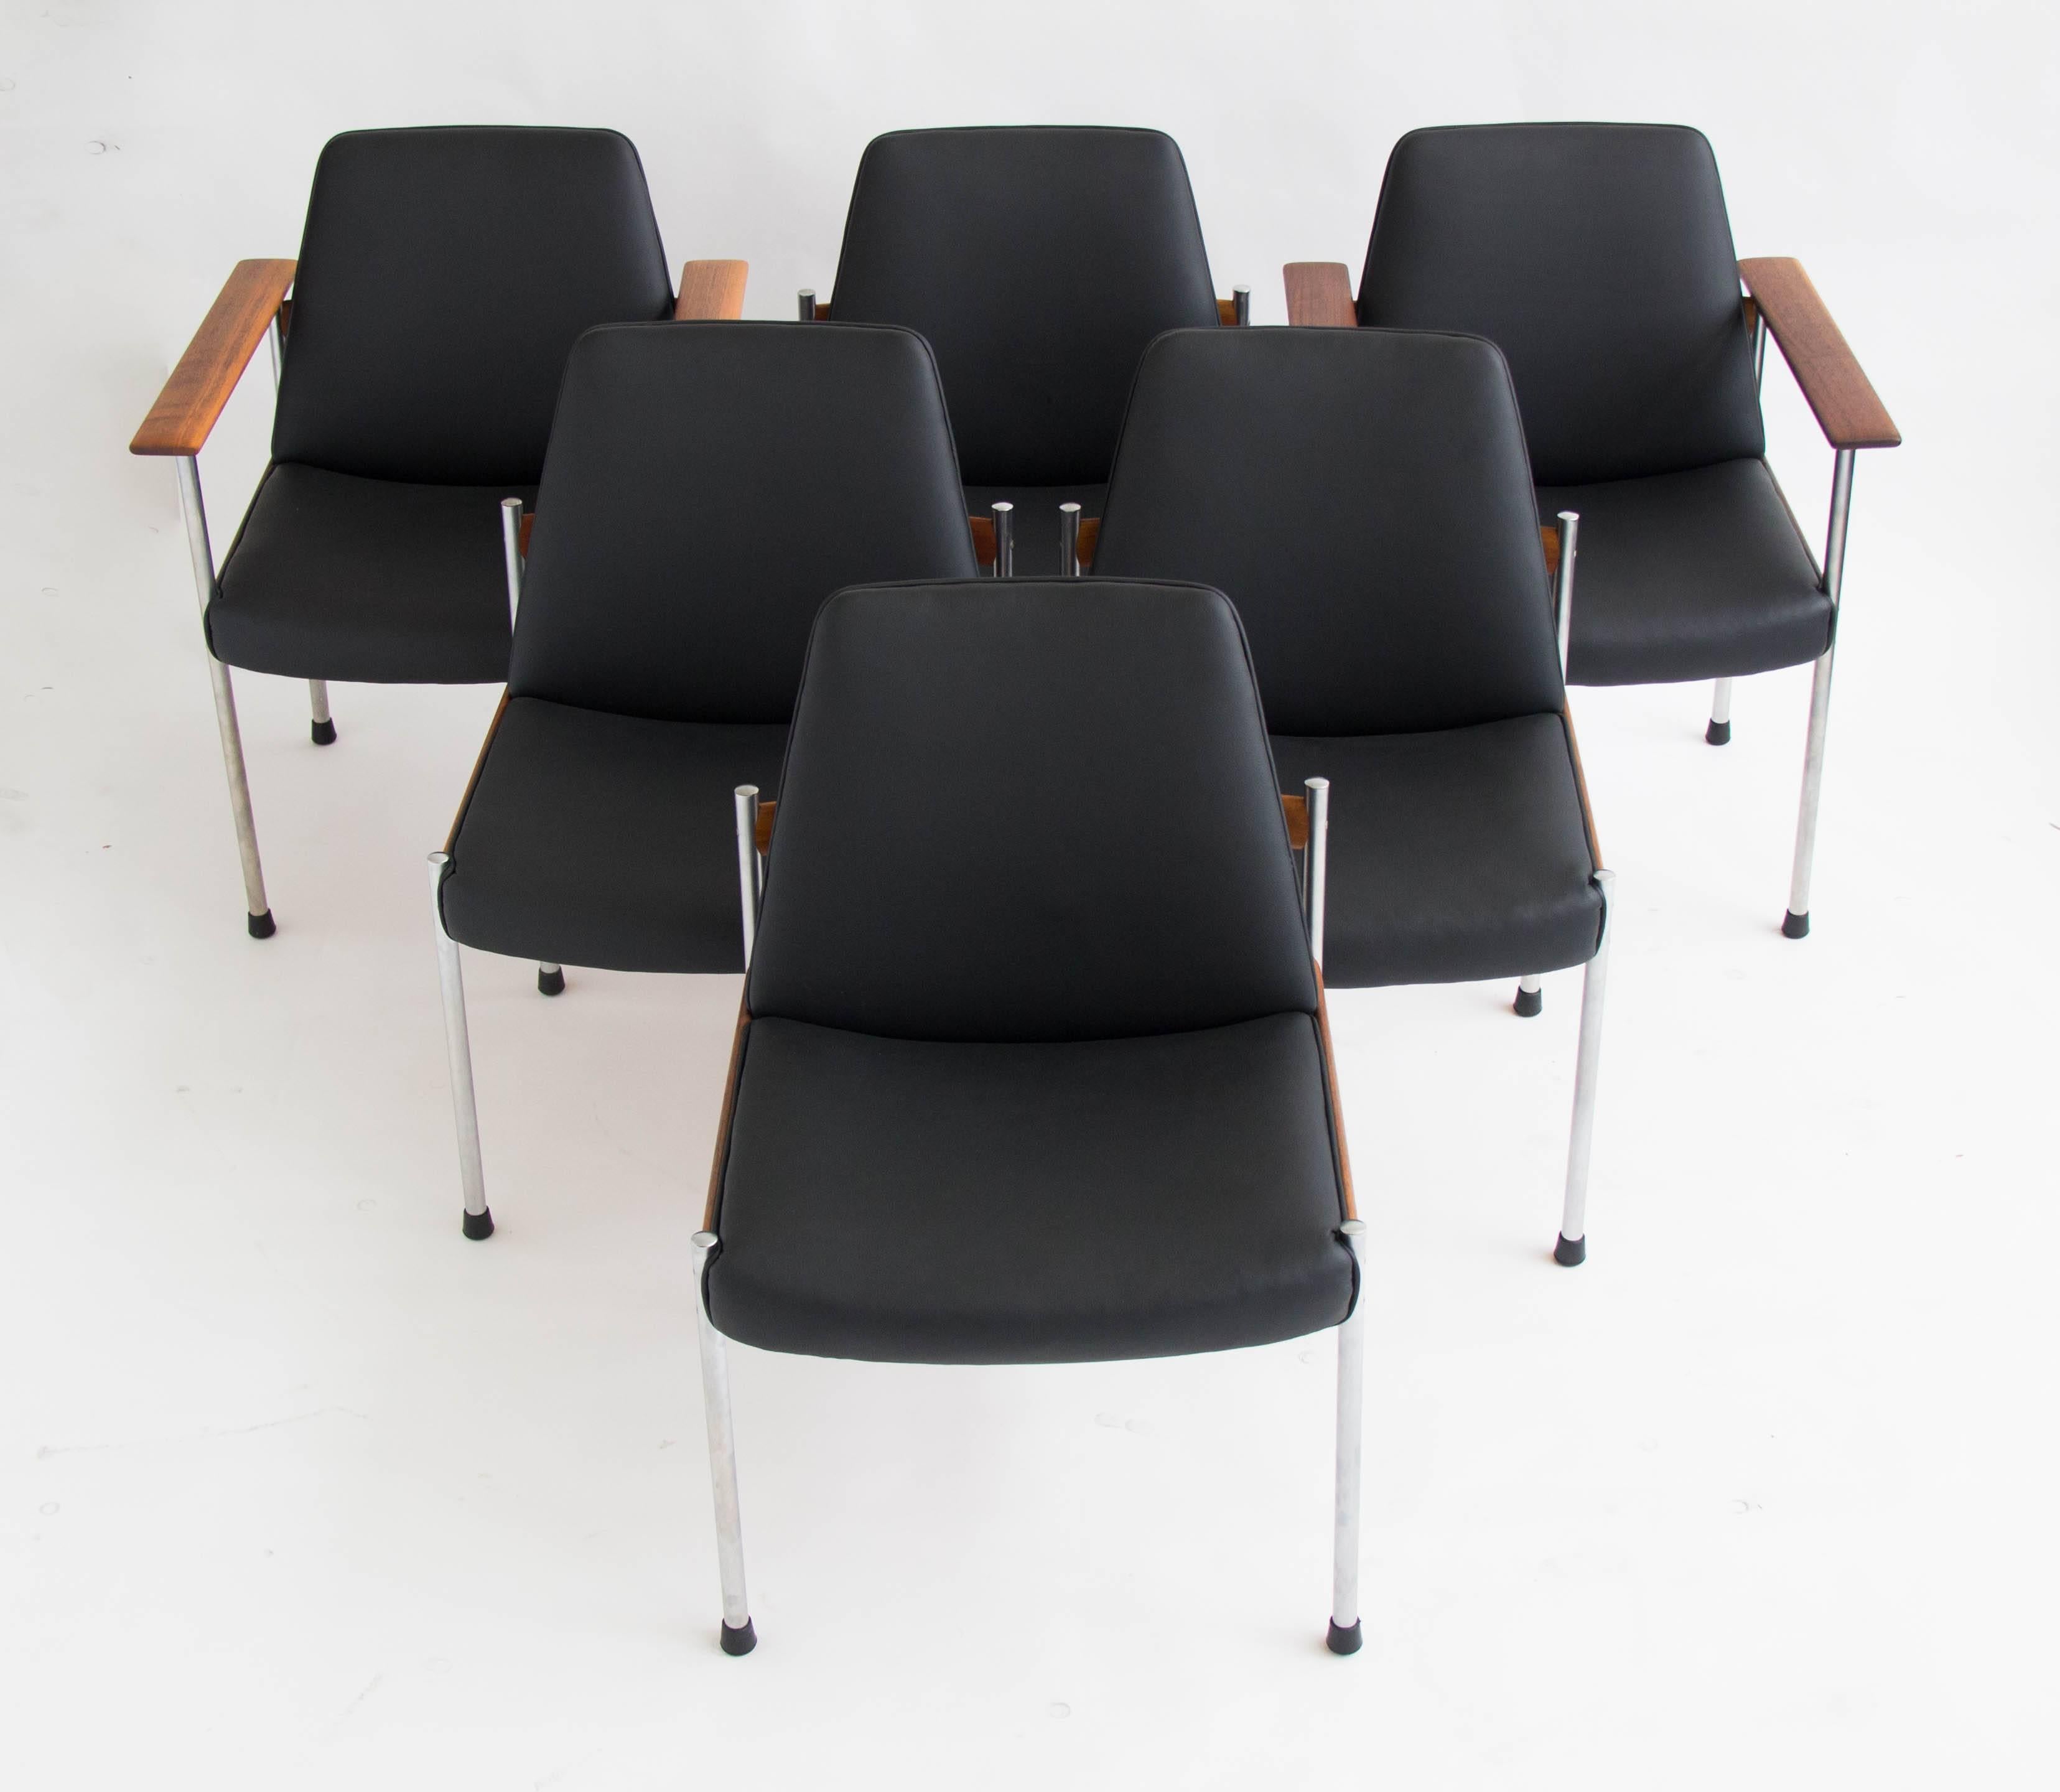 This is the third iteration or “3001” series of Dysthe’s popular conference group for Dokka Møbler of Oslo, produced from 1960-1961. The set has six matching chairs with a metal frame, teak crossbars and leather seat and backrest. Includes two